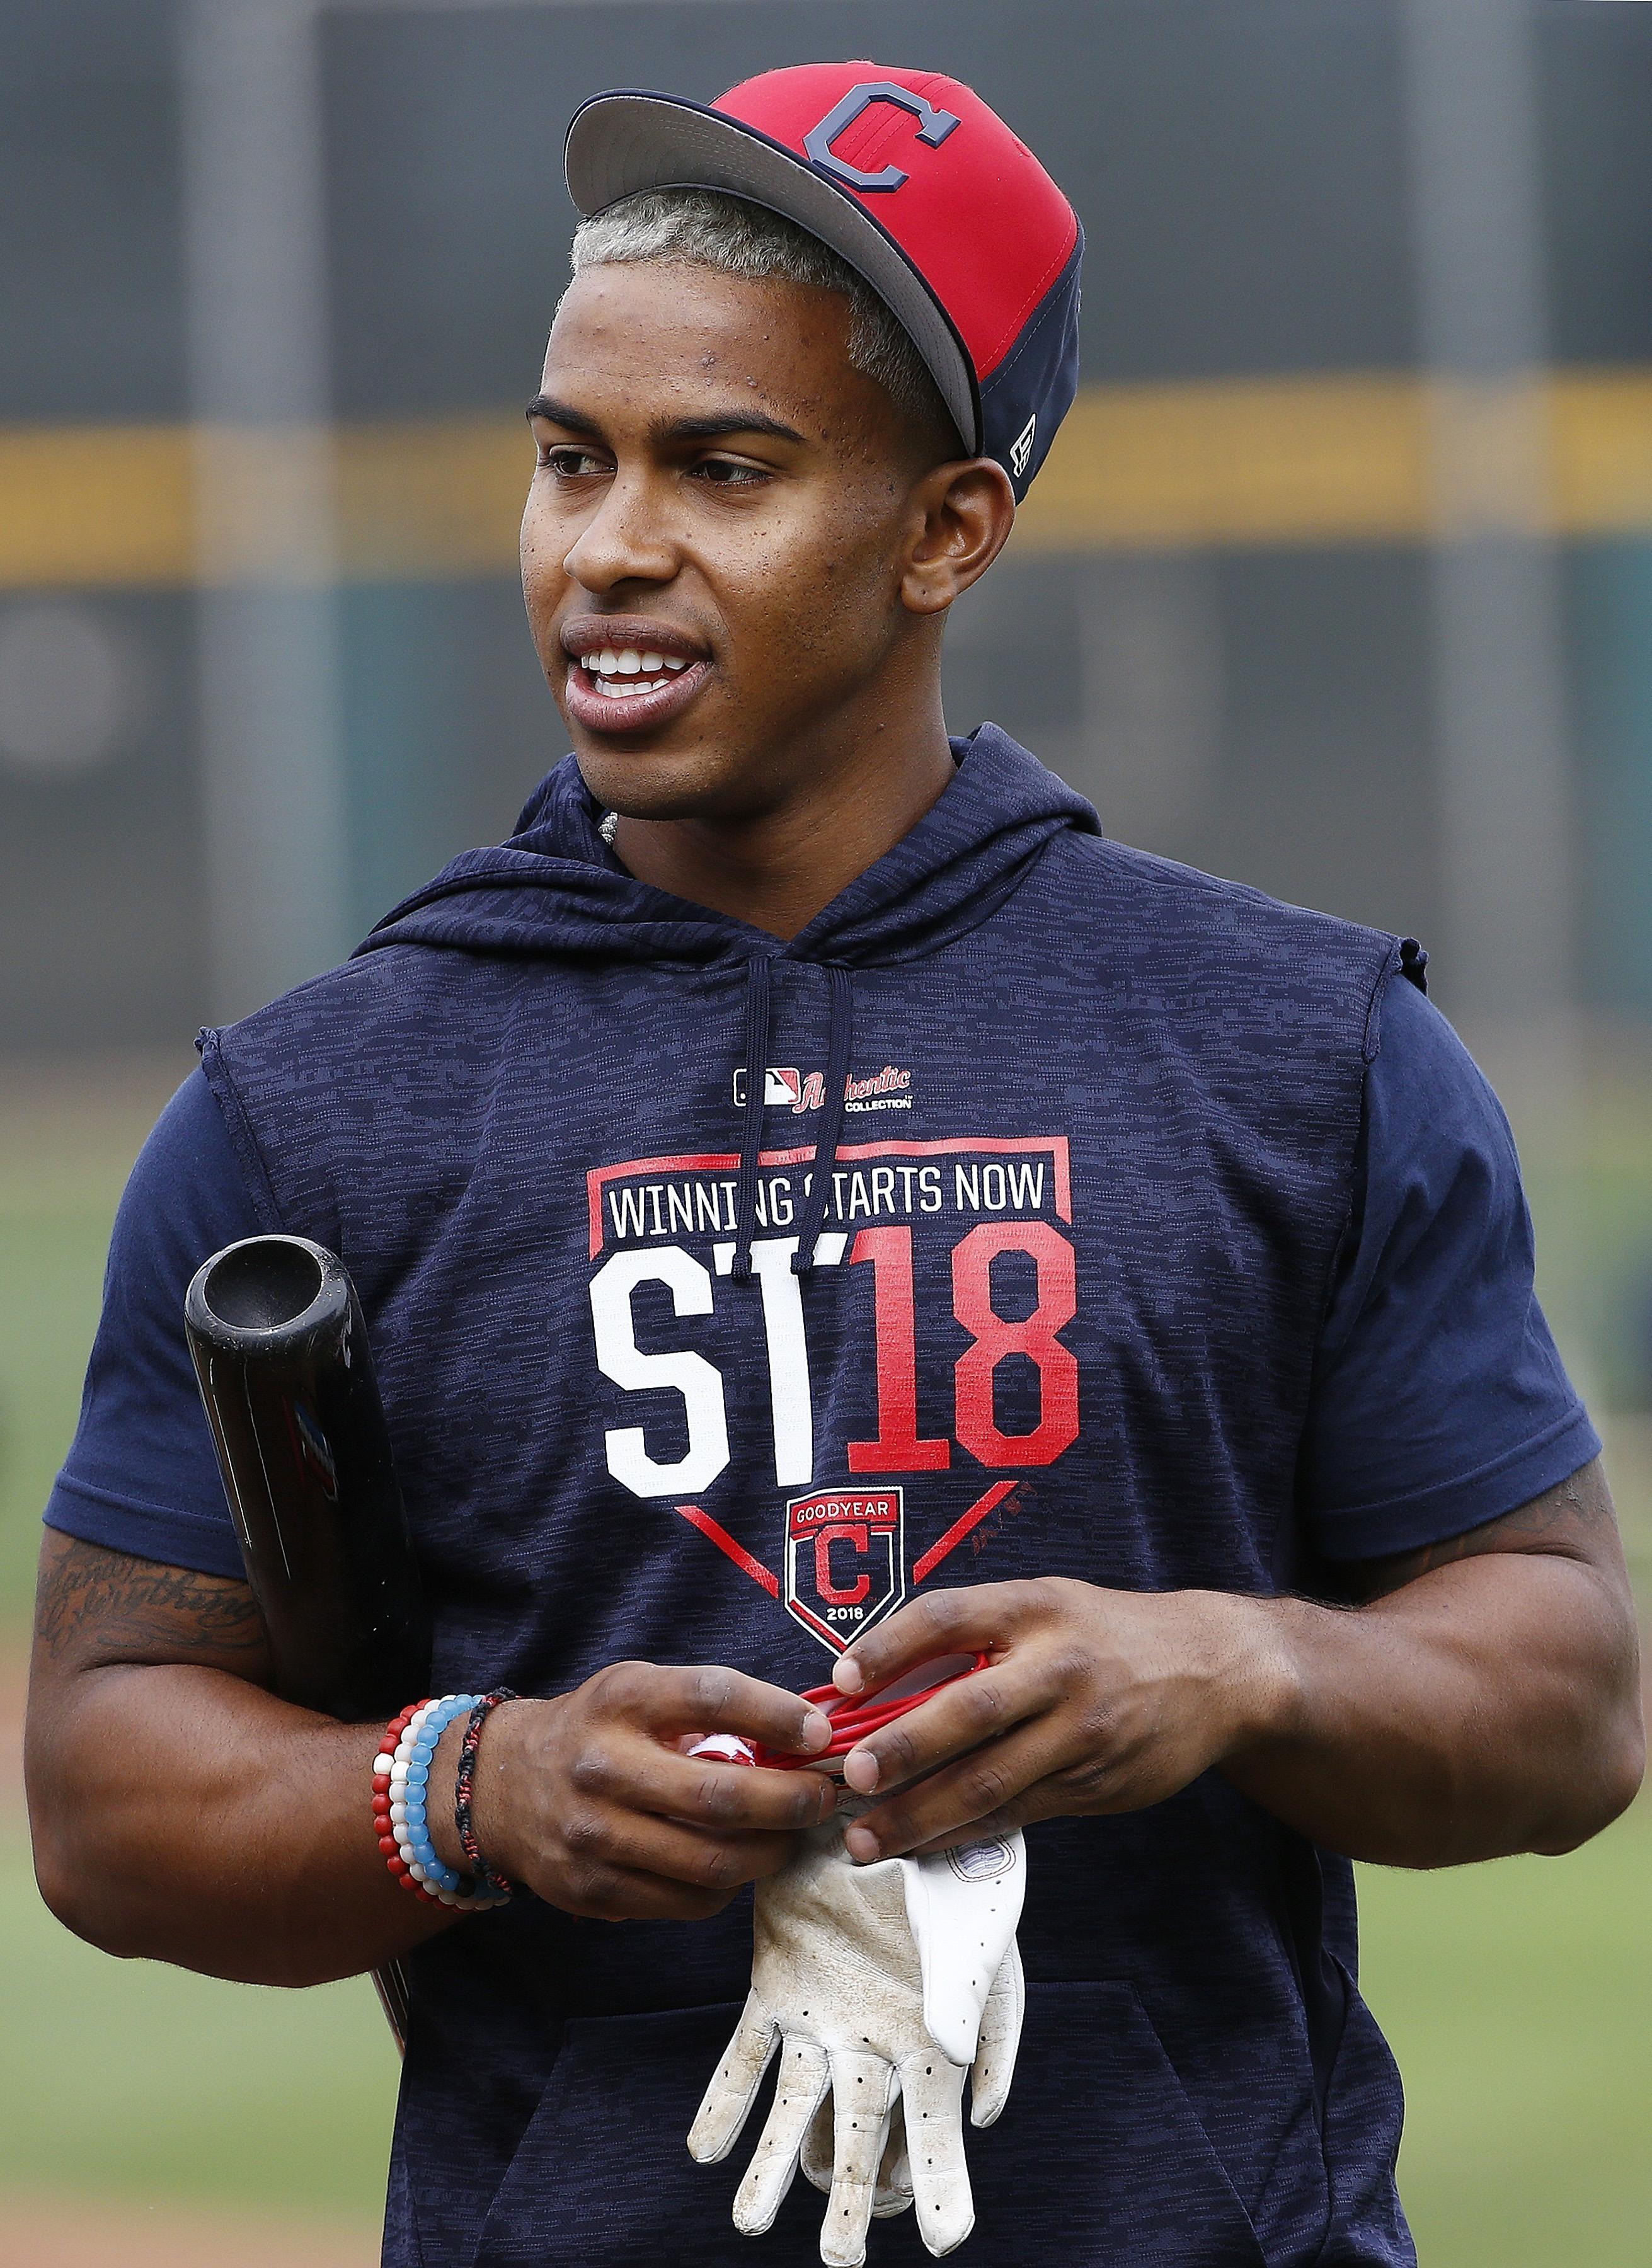 Indians' Francisco Lindor: new hair color, old pain from playoff loss